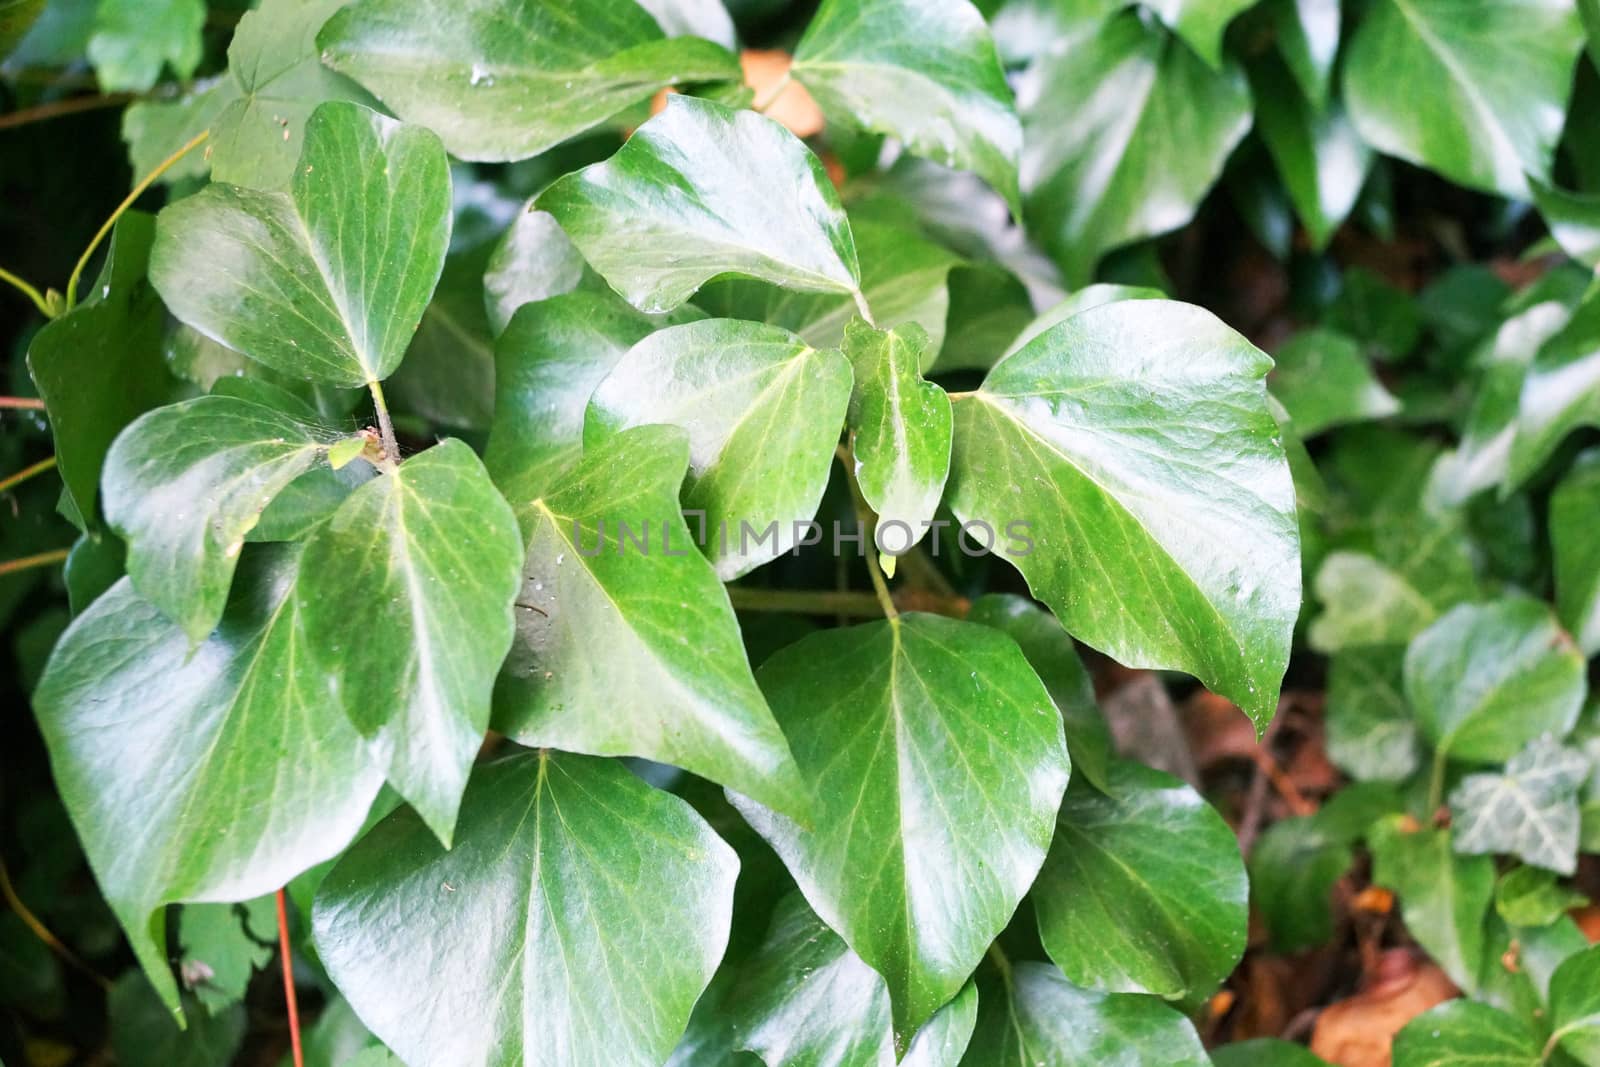 green glossy leaves close-up, plant background